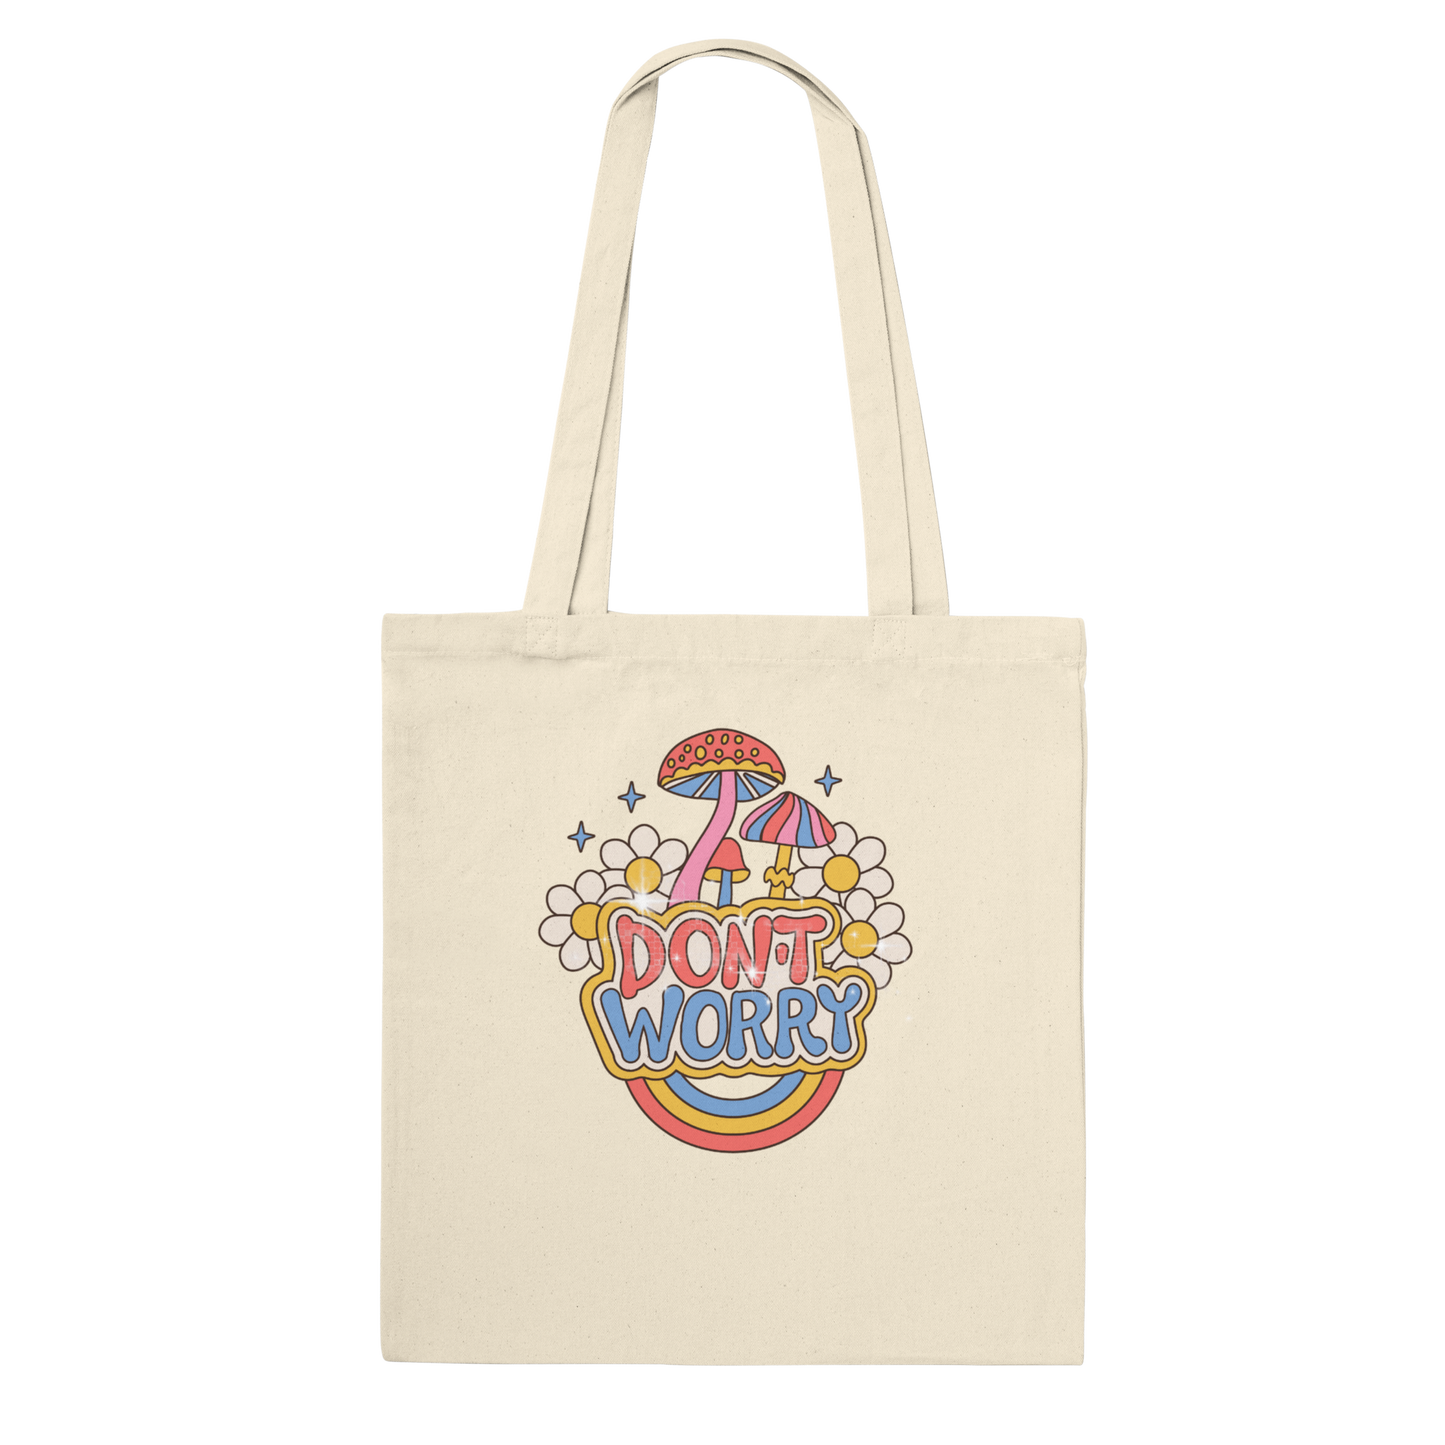 "It's a Really Good Day" Premium Tote Bag